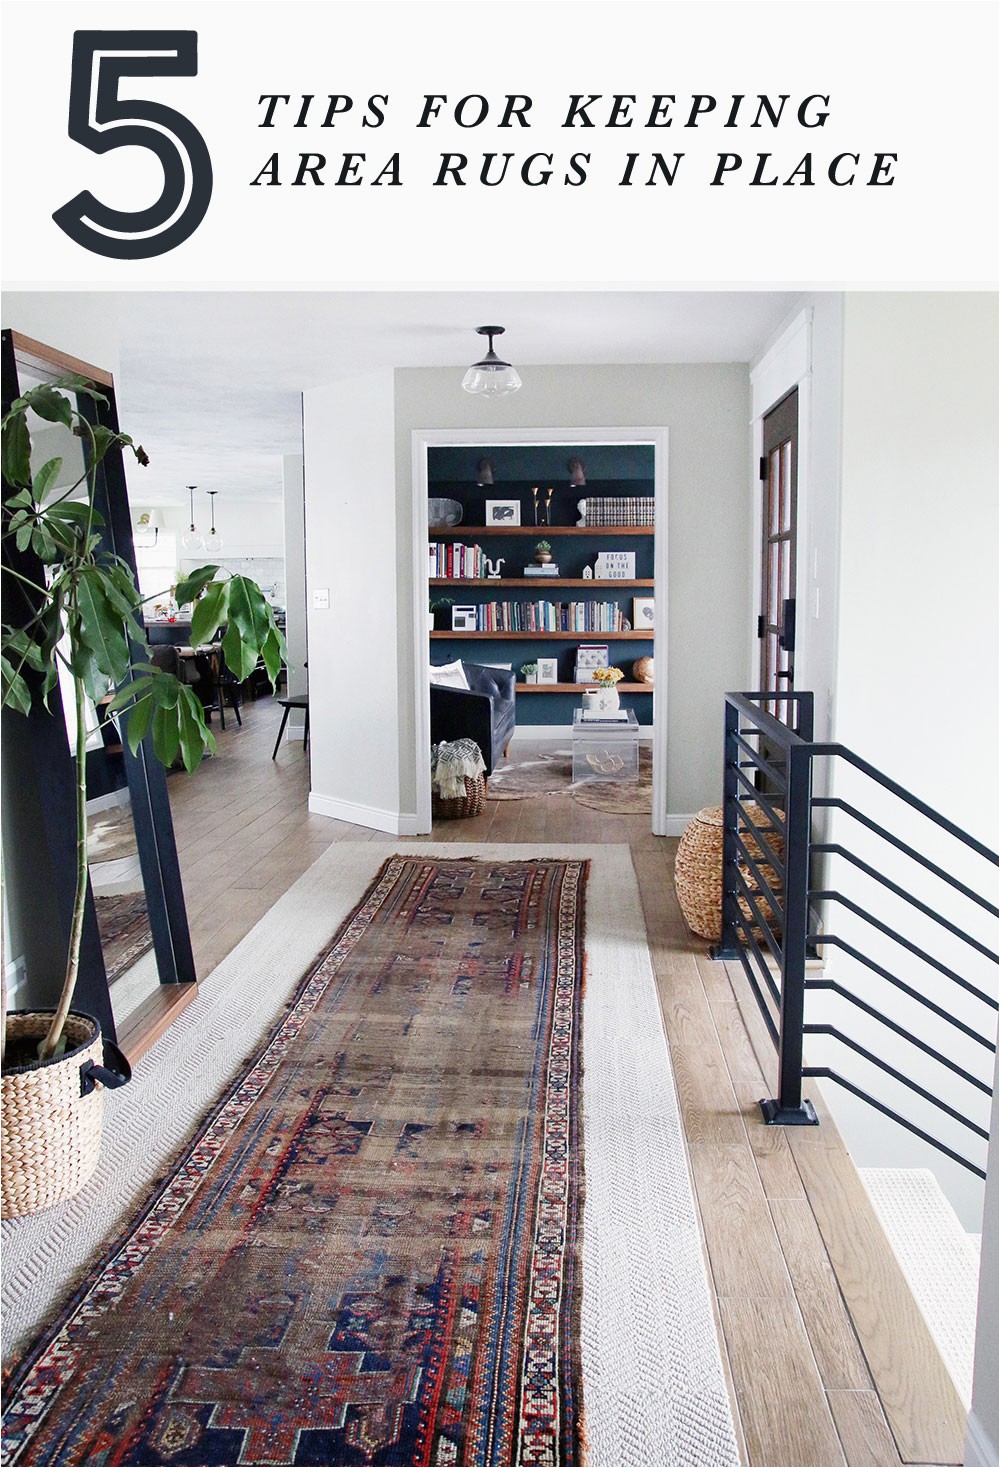 Carpet Tape for area Rugs On Carpet 5 Tips for Keeping area Rugs Exactly where You Want them